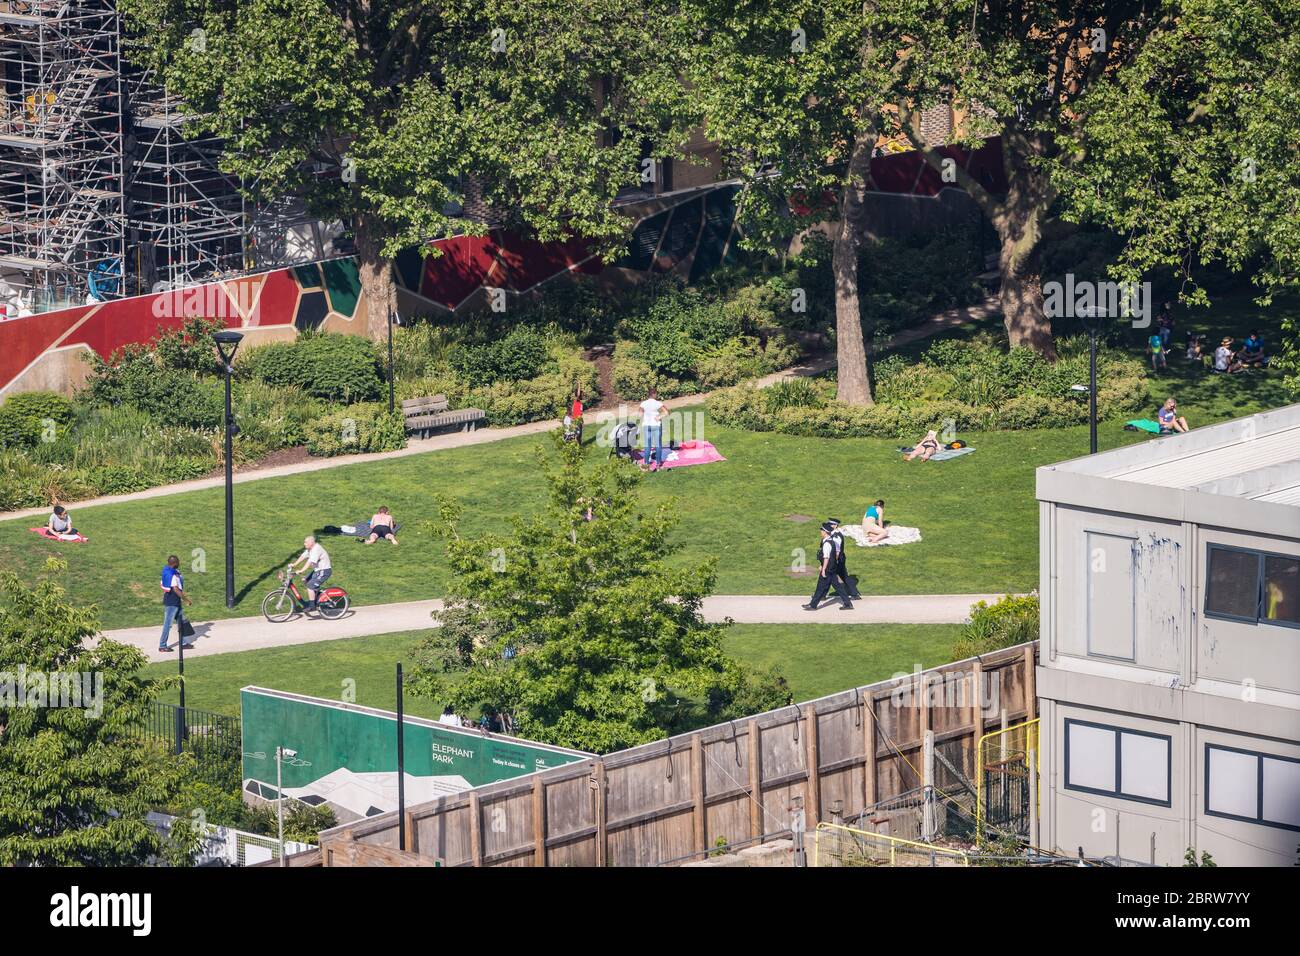 People observing social distancing in a sunny park Stock Photo